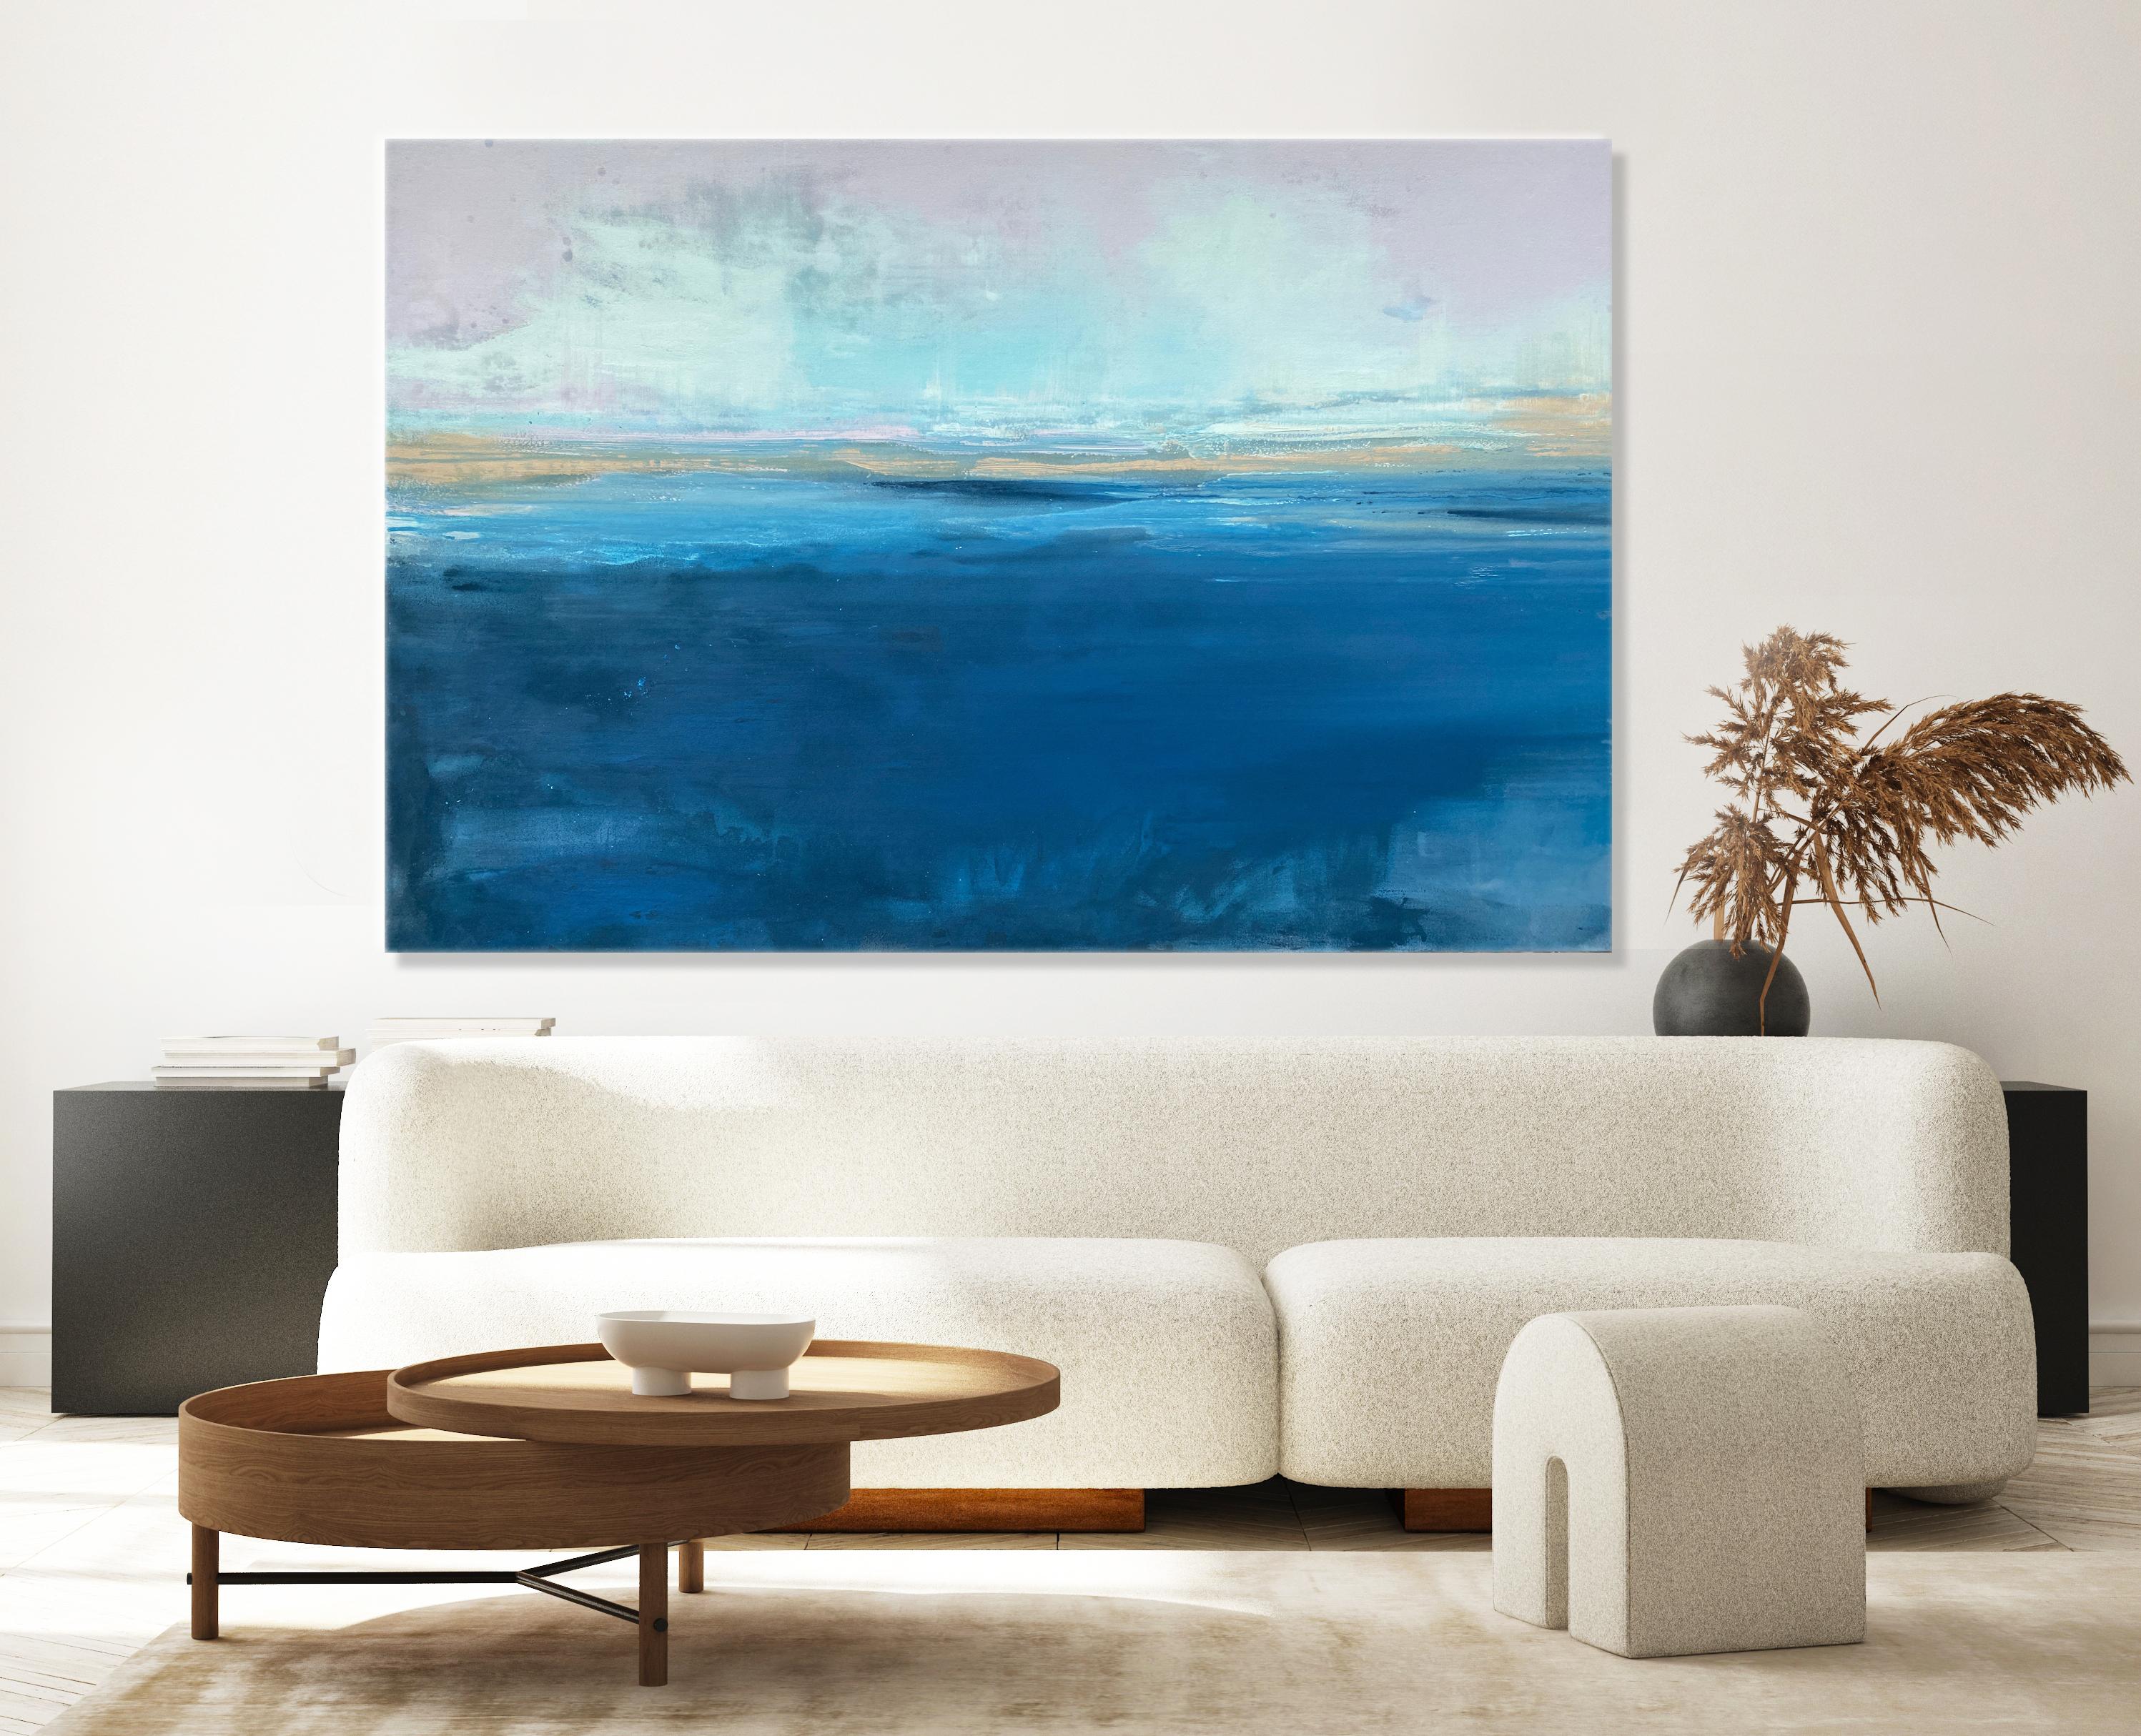 Large ocean abstract impressionist landscape white blue grey gold clouds sky - Painting by Kathleen Rhee